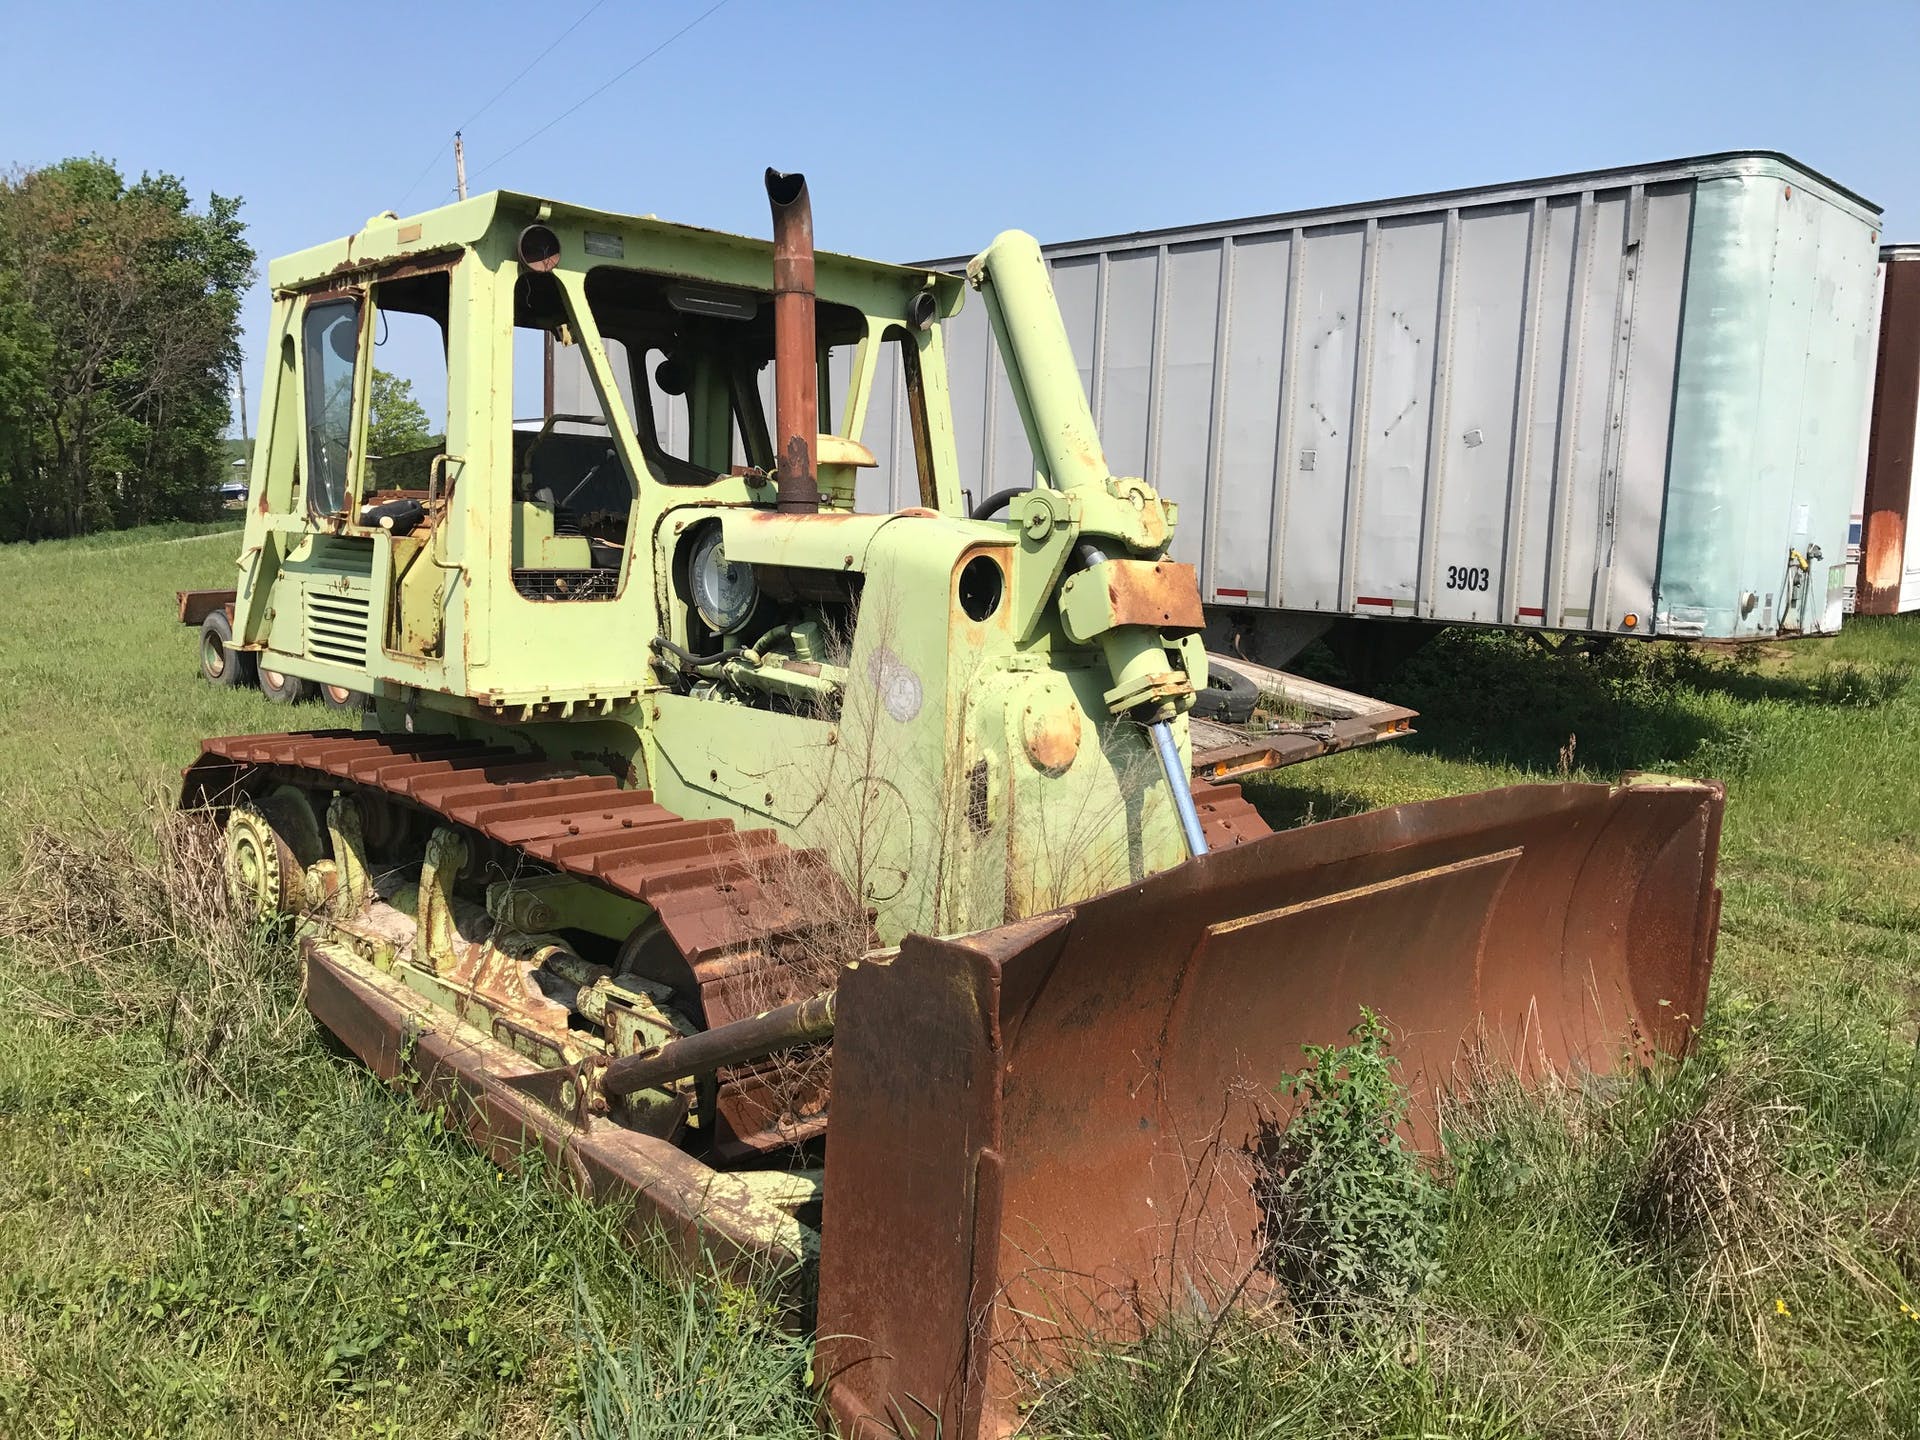 Terex D700A dozer before restoration rusted in weeds